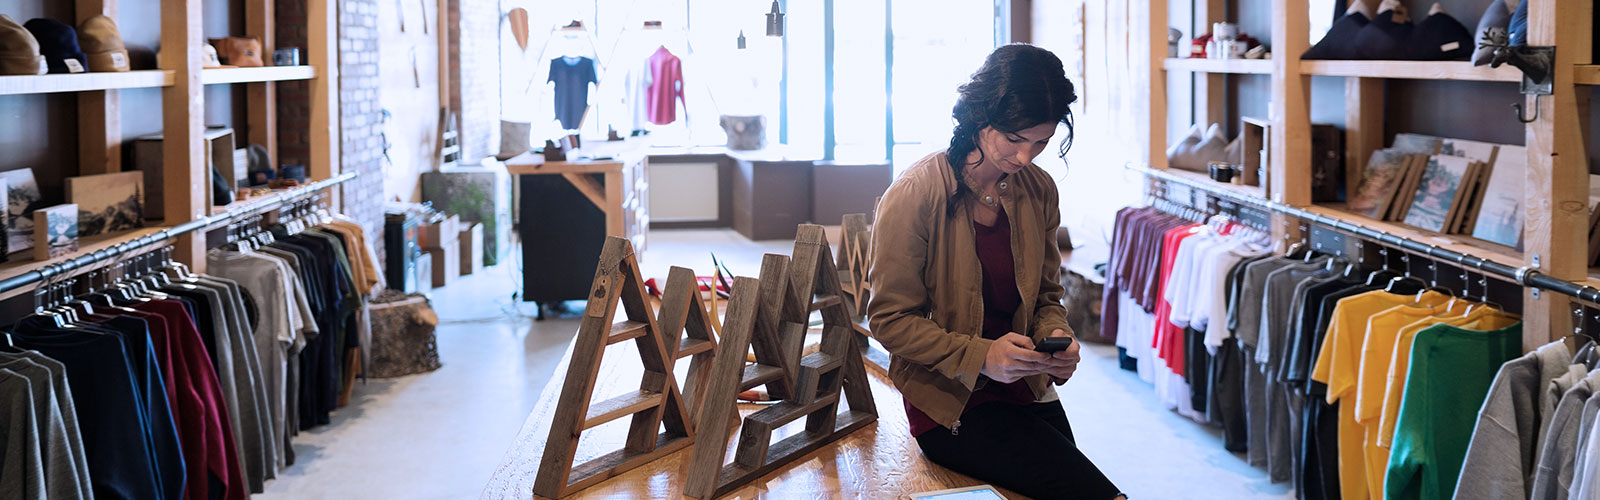 A woman sitting on a wooden table in a clothes shop.